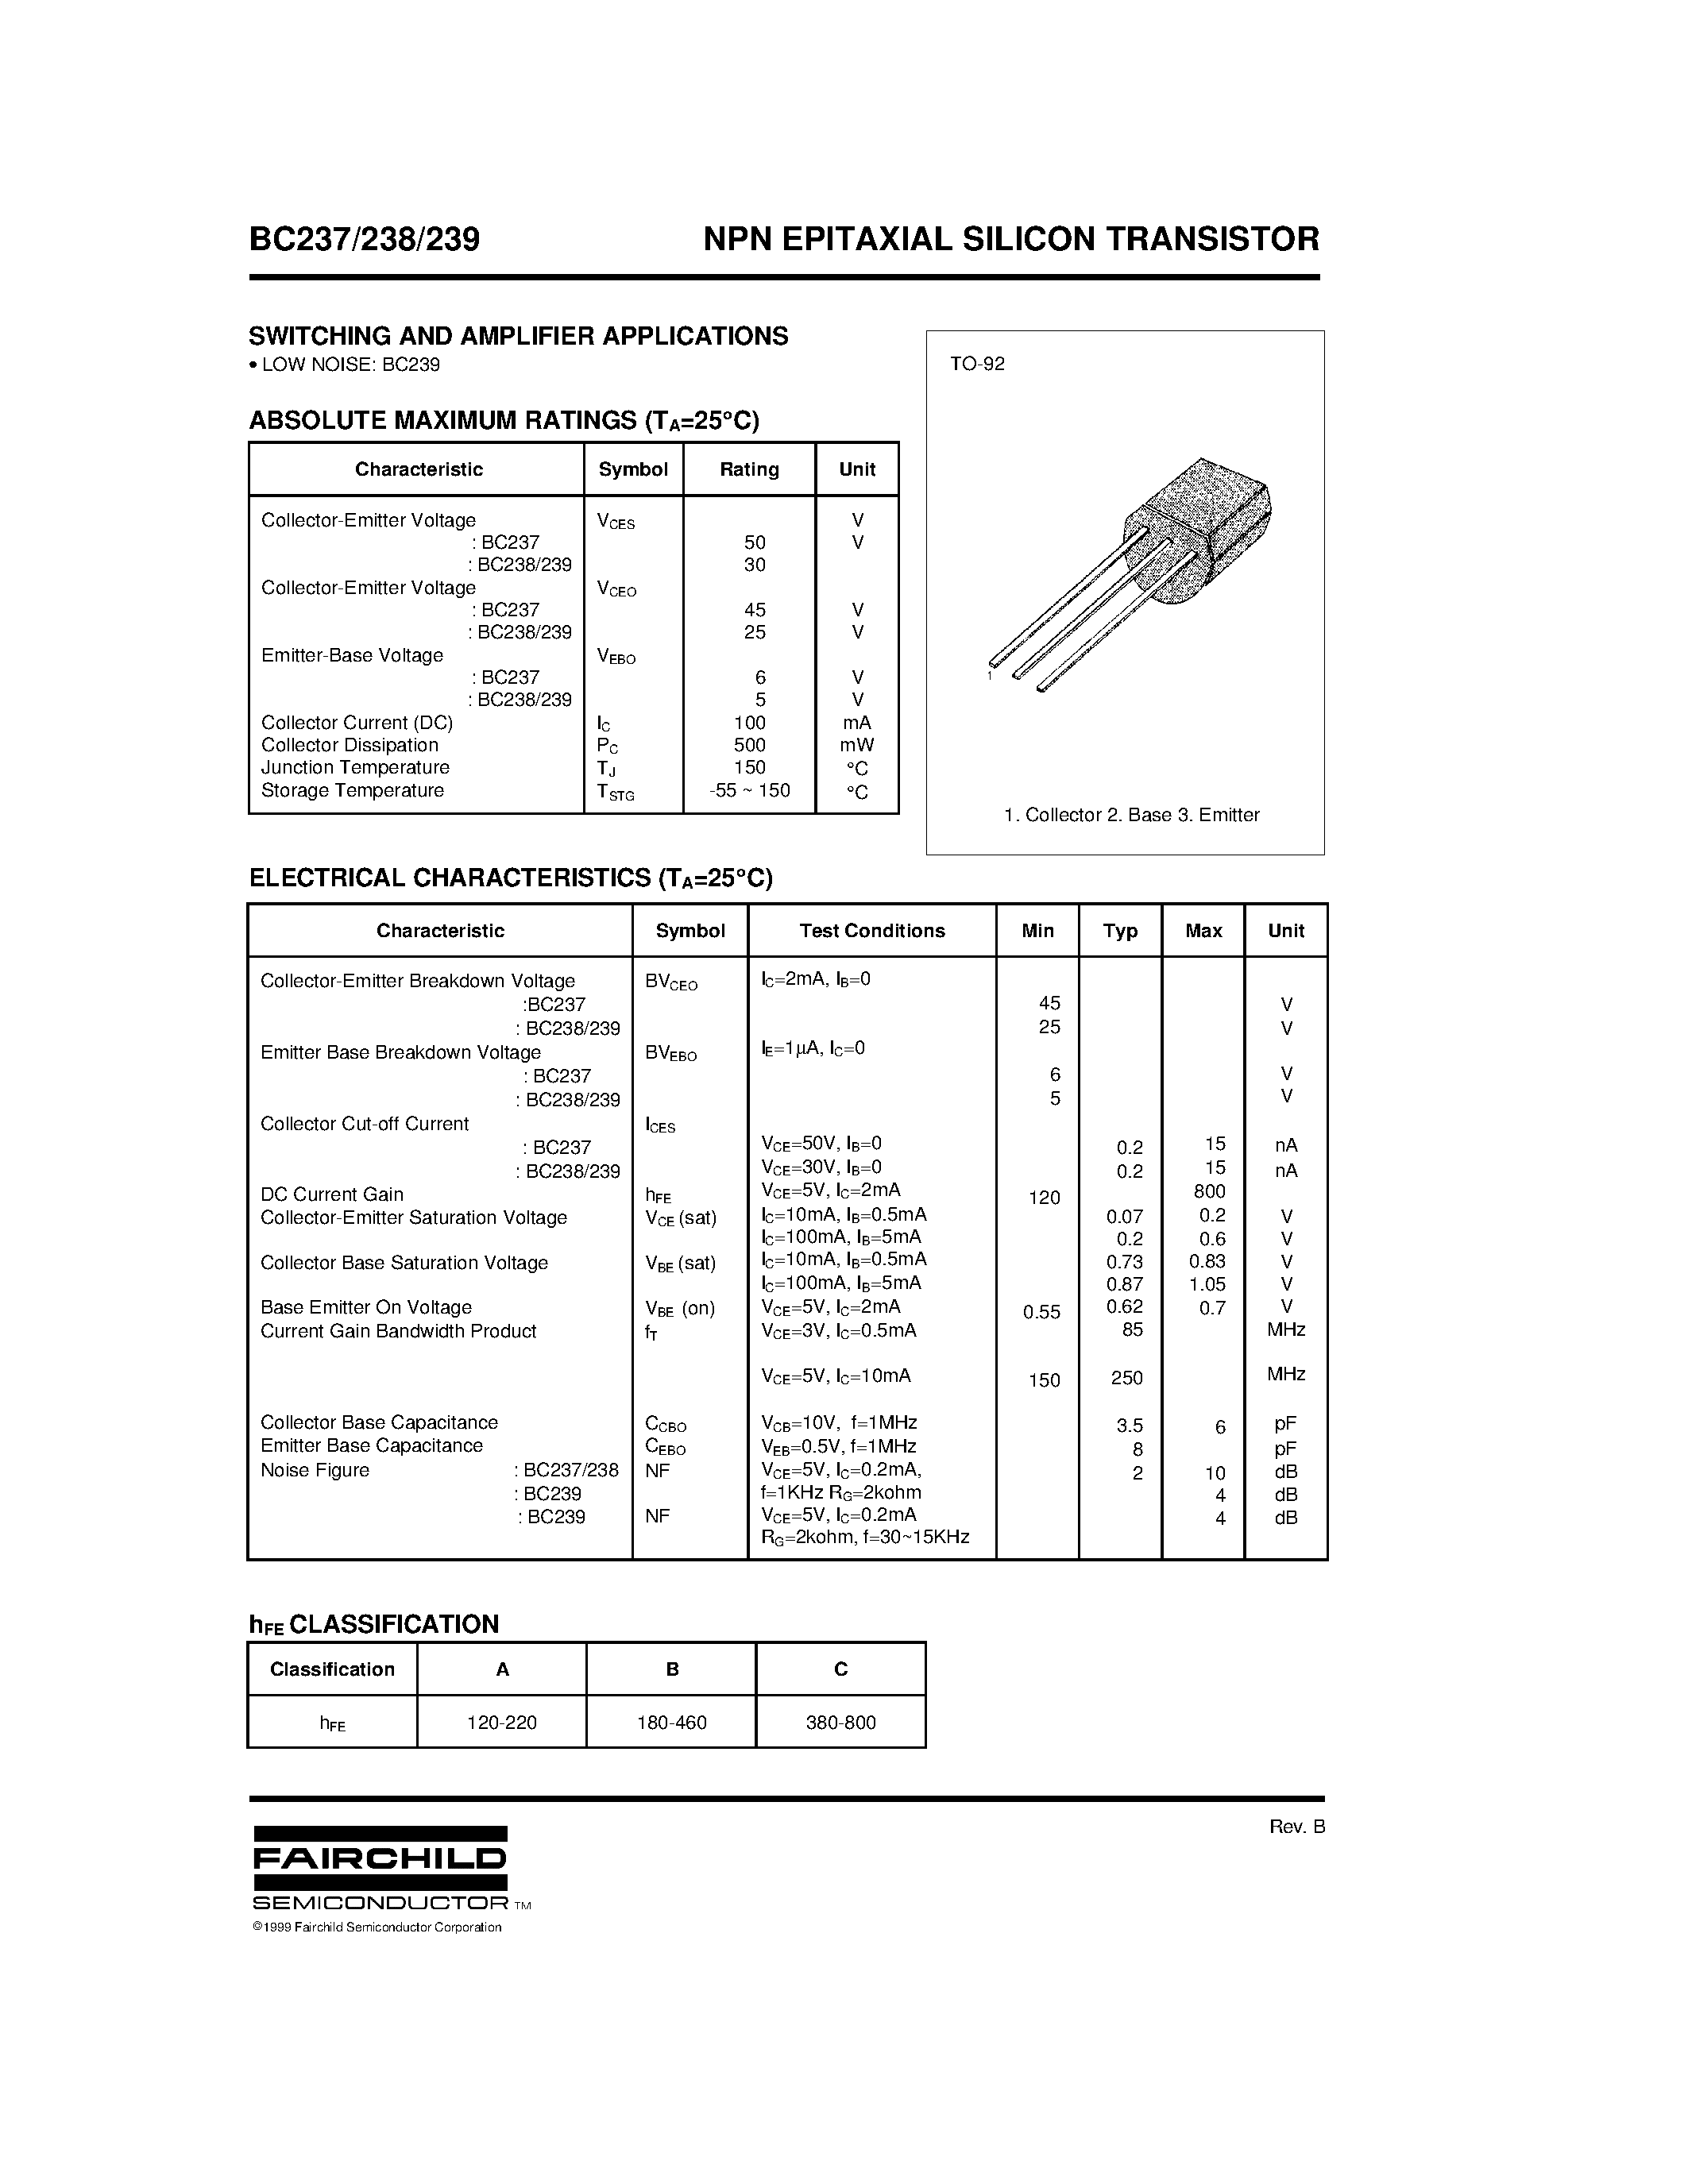 Datasheet BC238 - NPN EPITAXIAL SILICON TRANSISTOR page 1